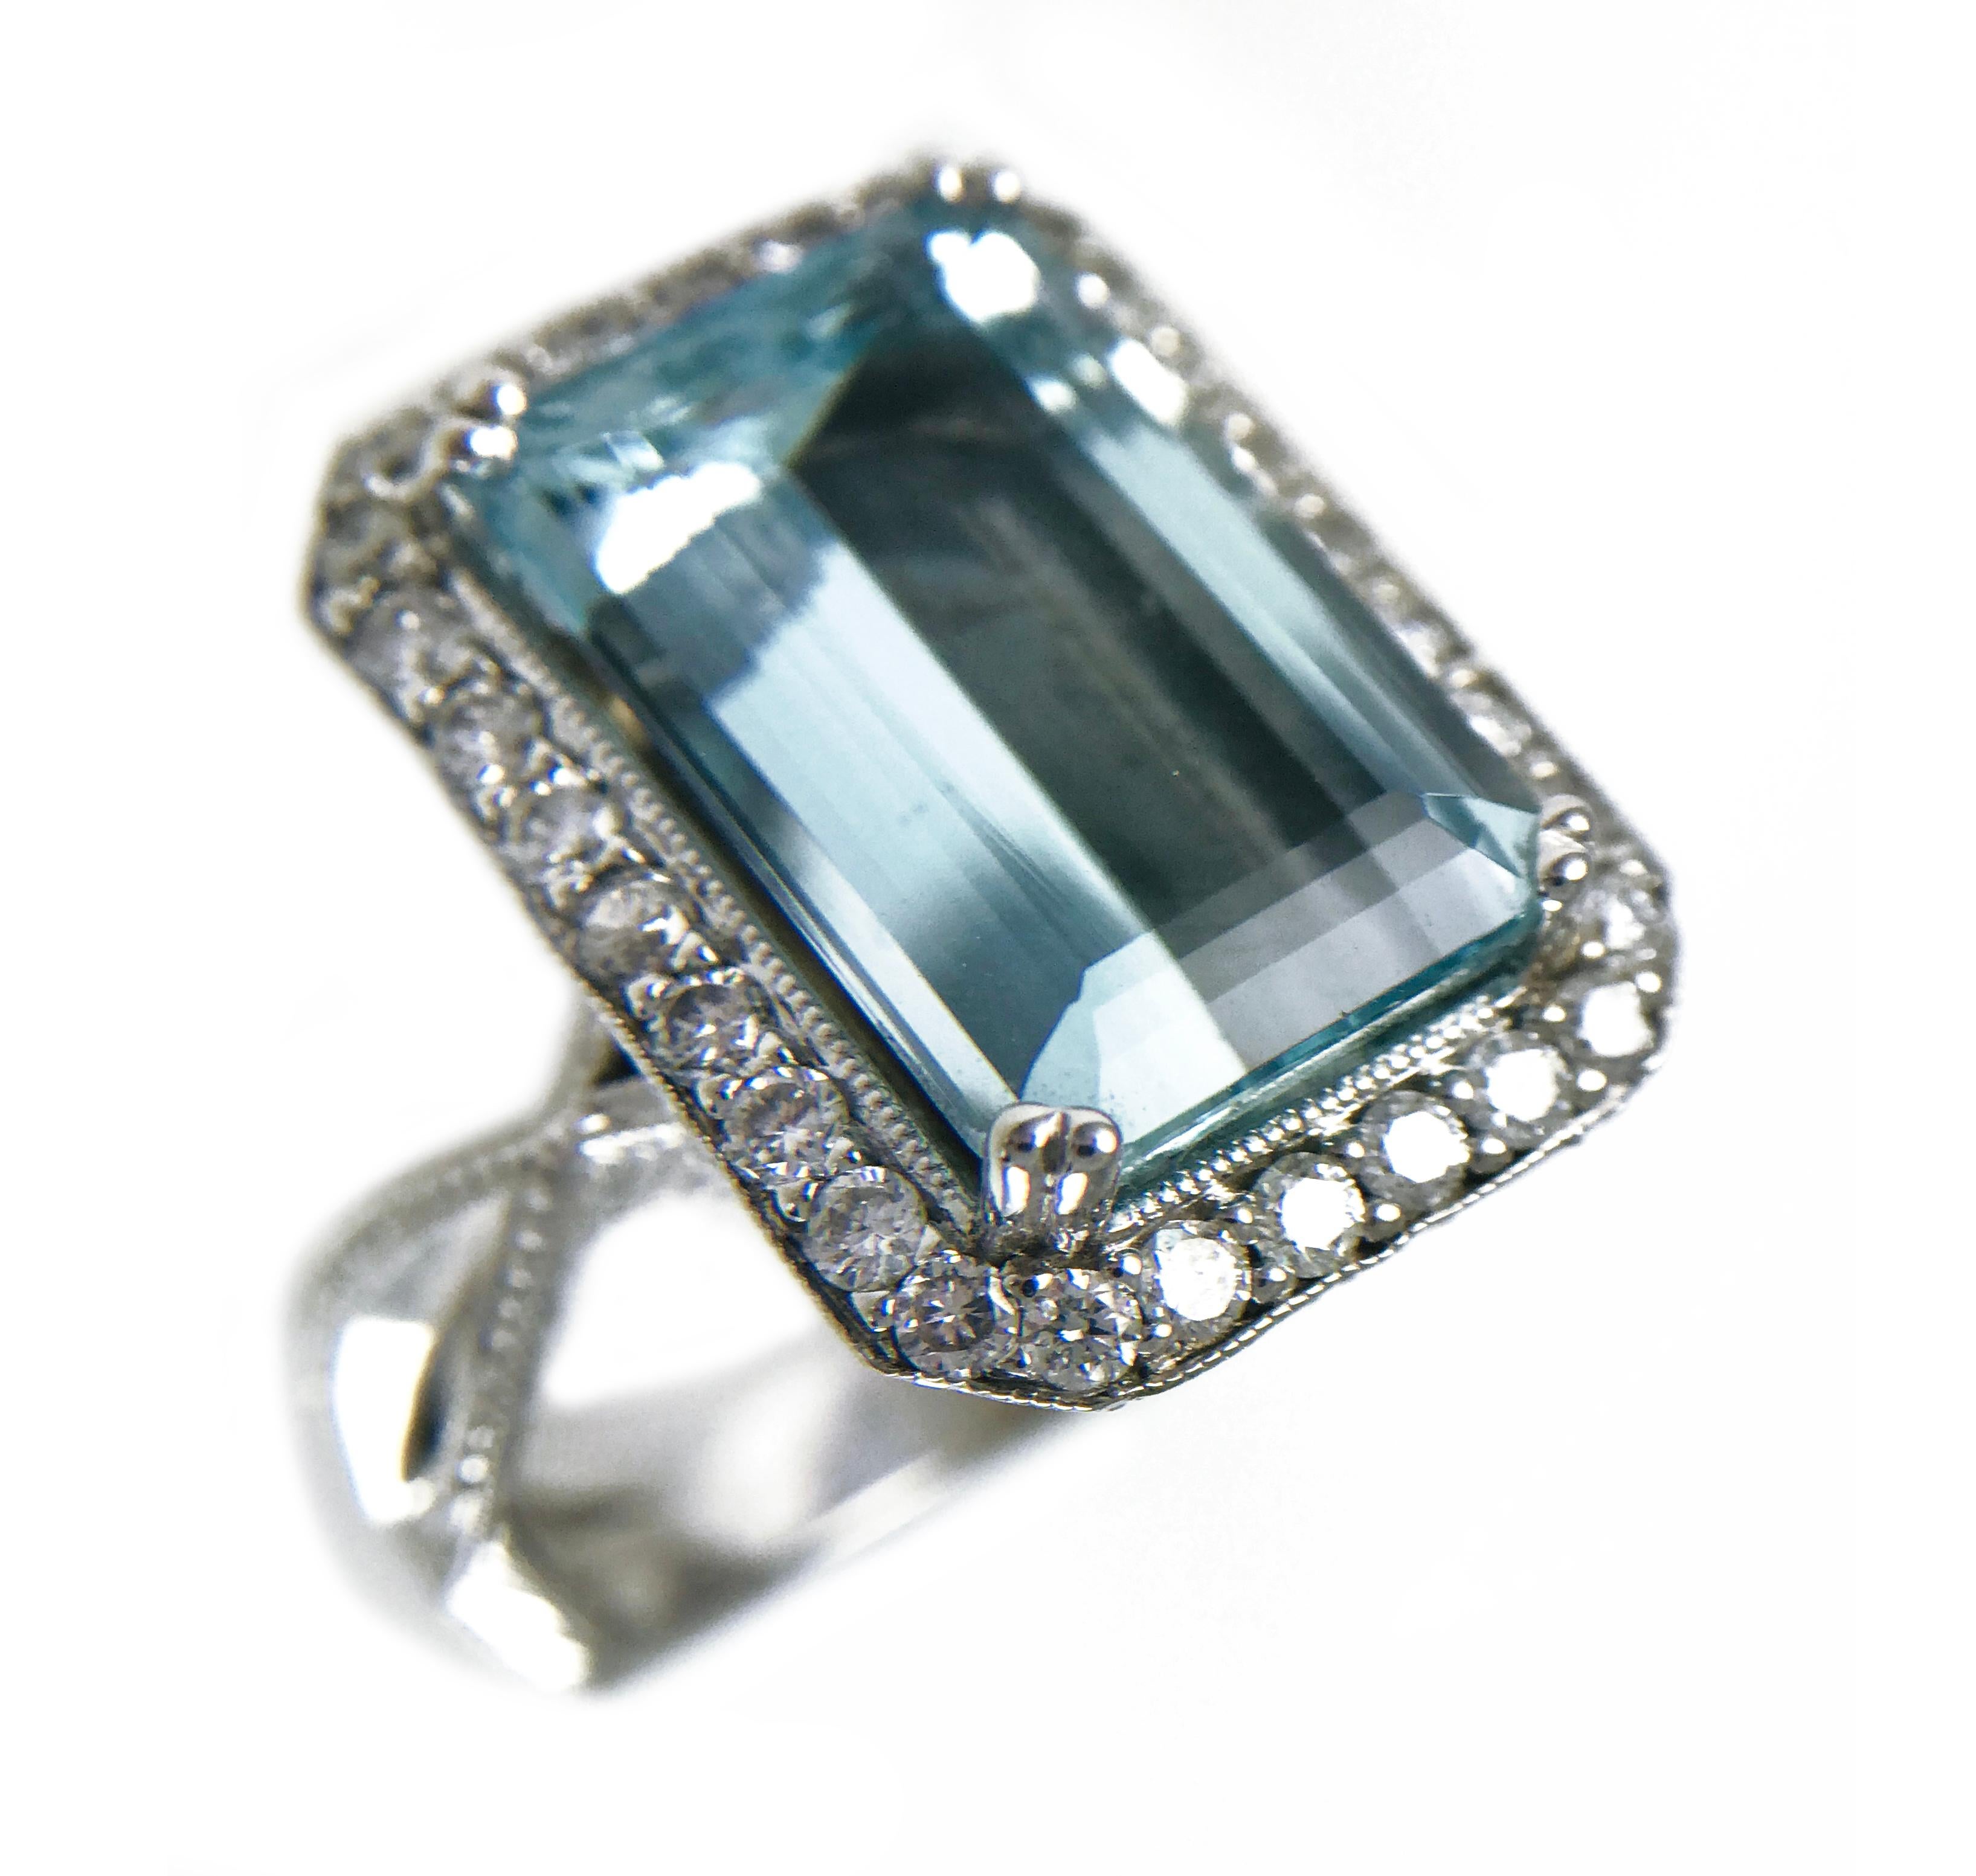 14 Karat White Gold Emerald-Cut Aquamarine Ring with milgrain detail and bead-set Diamond surround. The center Aquamarine gemstone is set in an enclosed mirrored mounting and measures 15mm x 9.7mm. The Aquamarine has a carat weight of 6.72ct, the